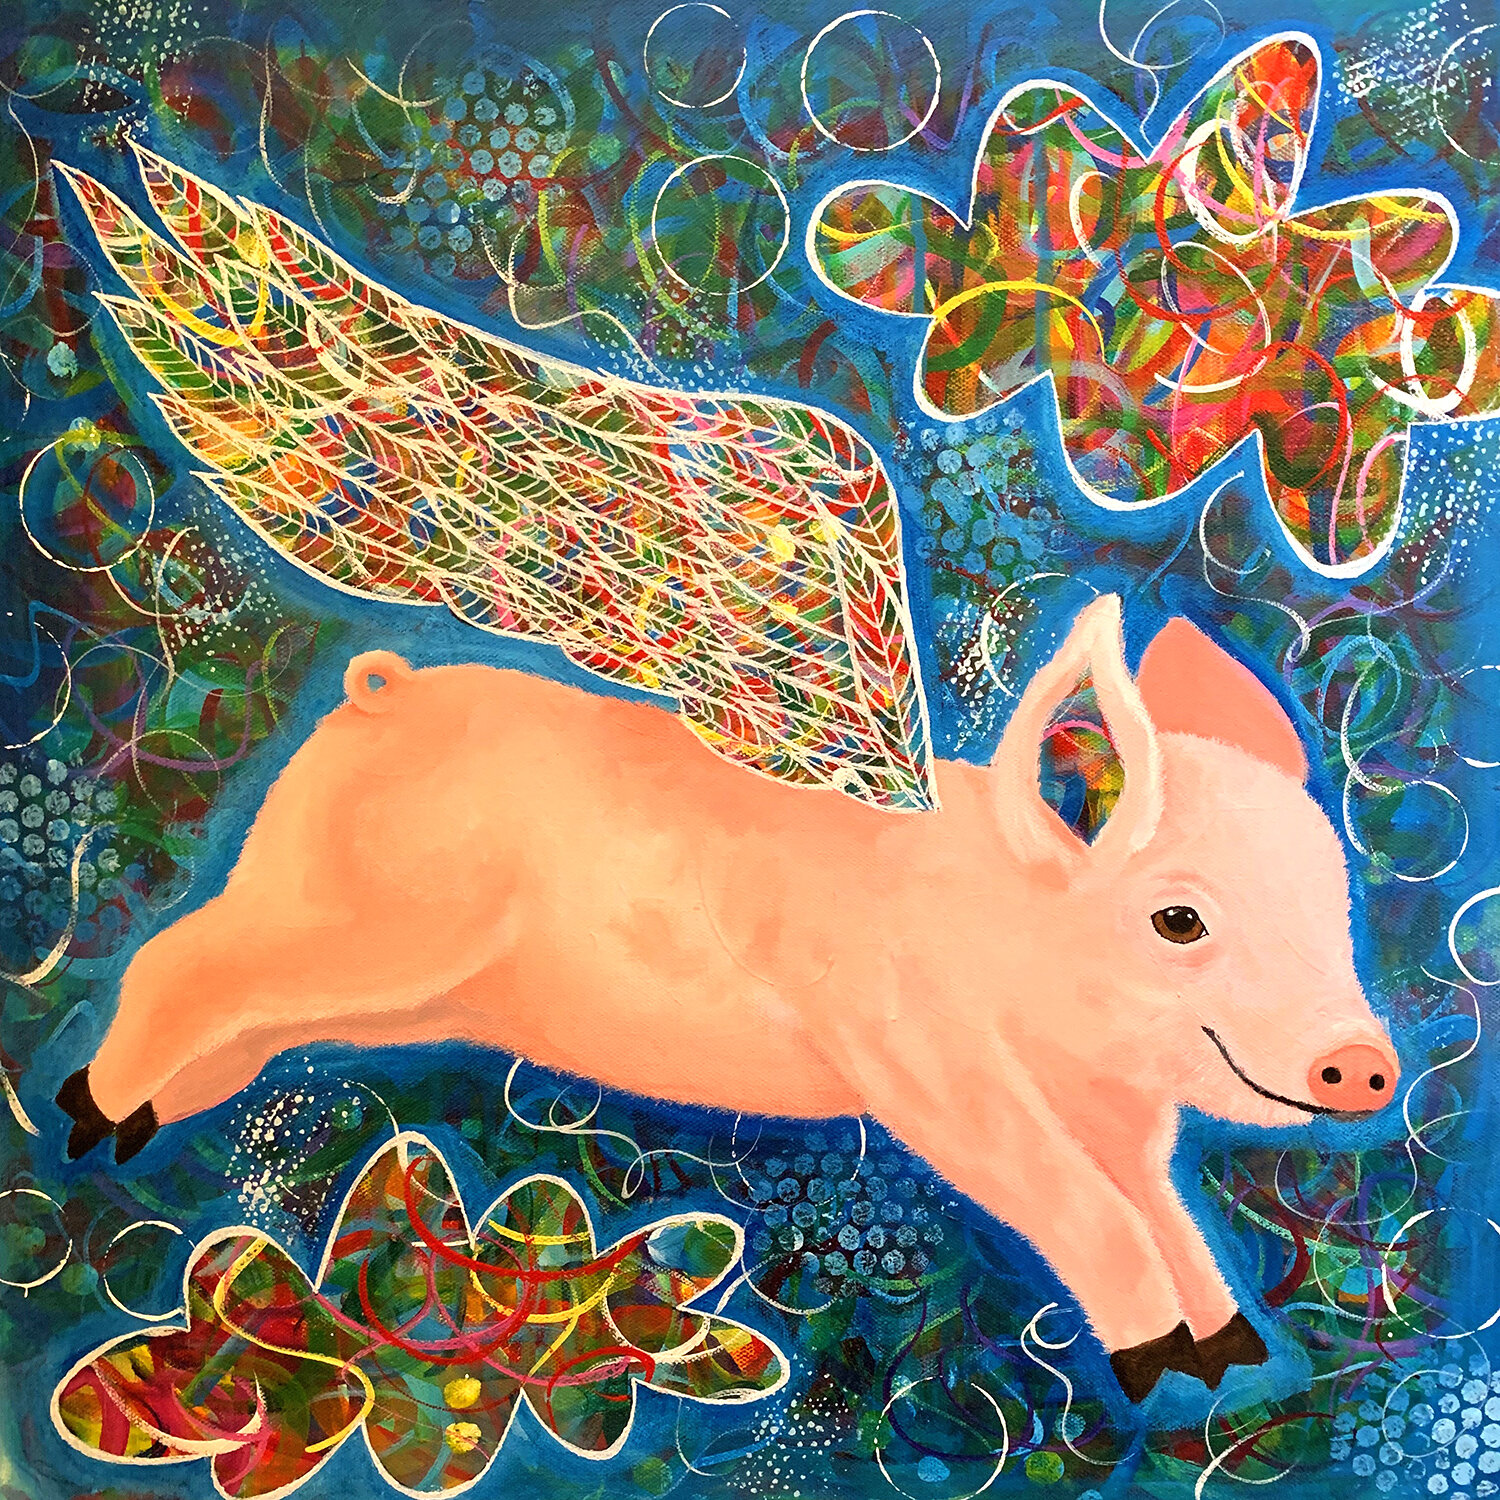  (Photo 6) The finished product. “Flying Lessons” is one of Sherry J. Williamson’s eight paintings in Whimsy &amp; Flights of Fancy. (PHOTOS COURTESY OF SHERRY J. WILLIAMSON) 